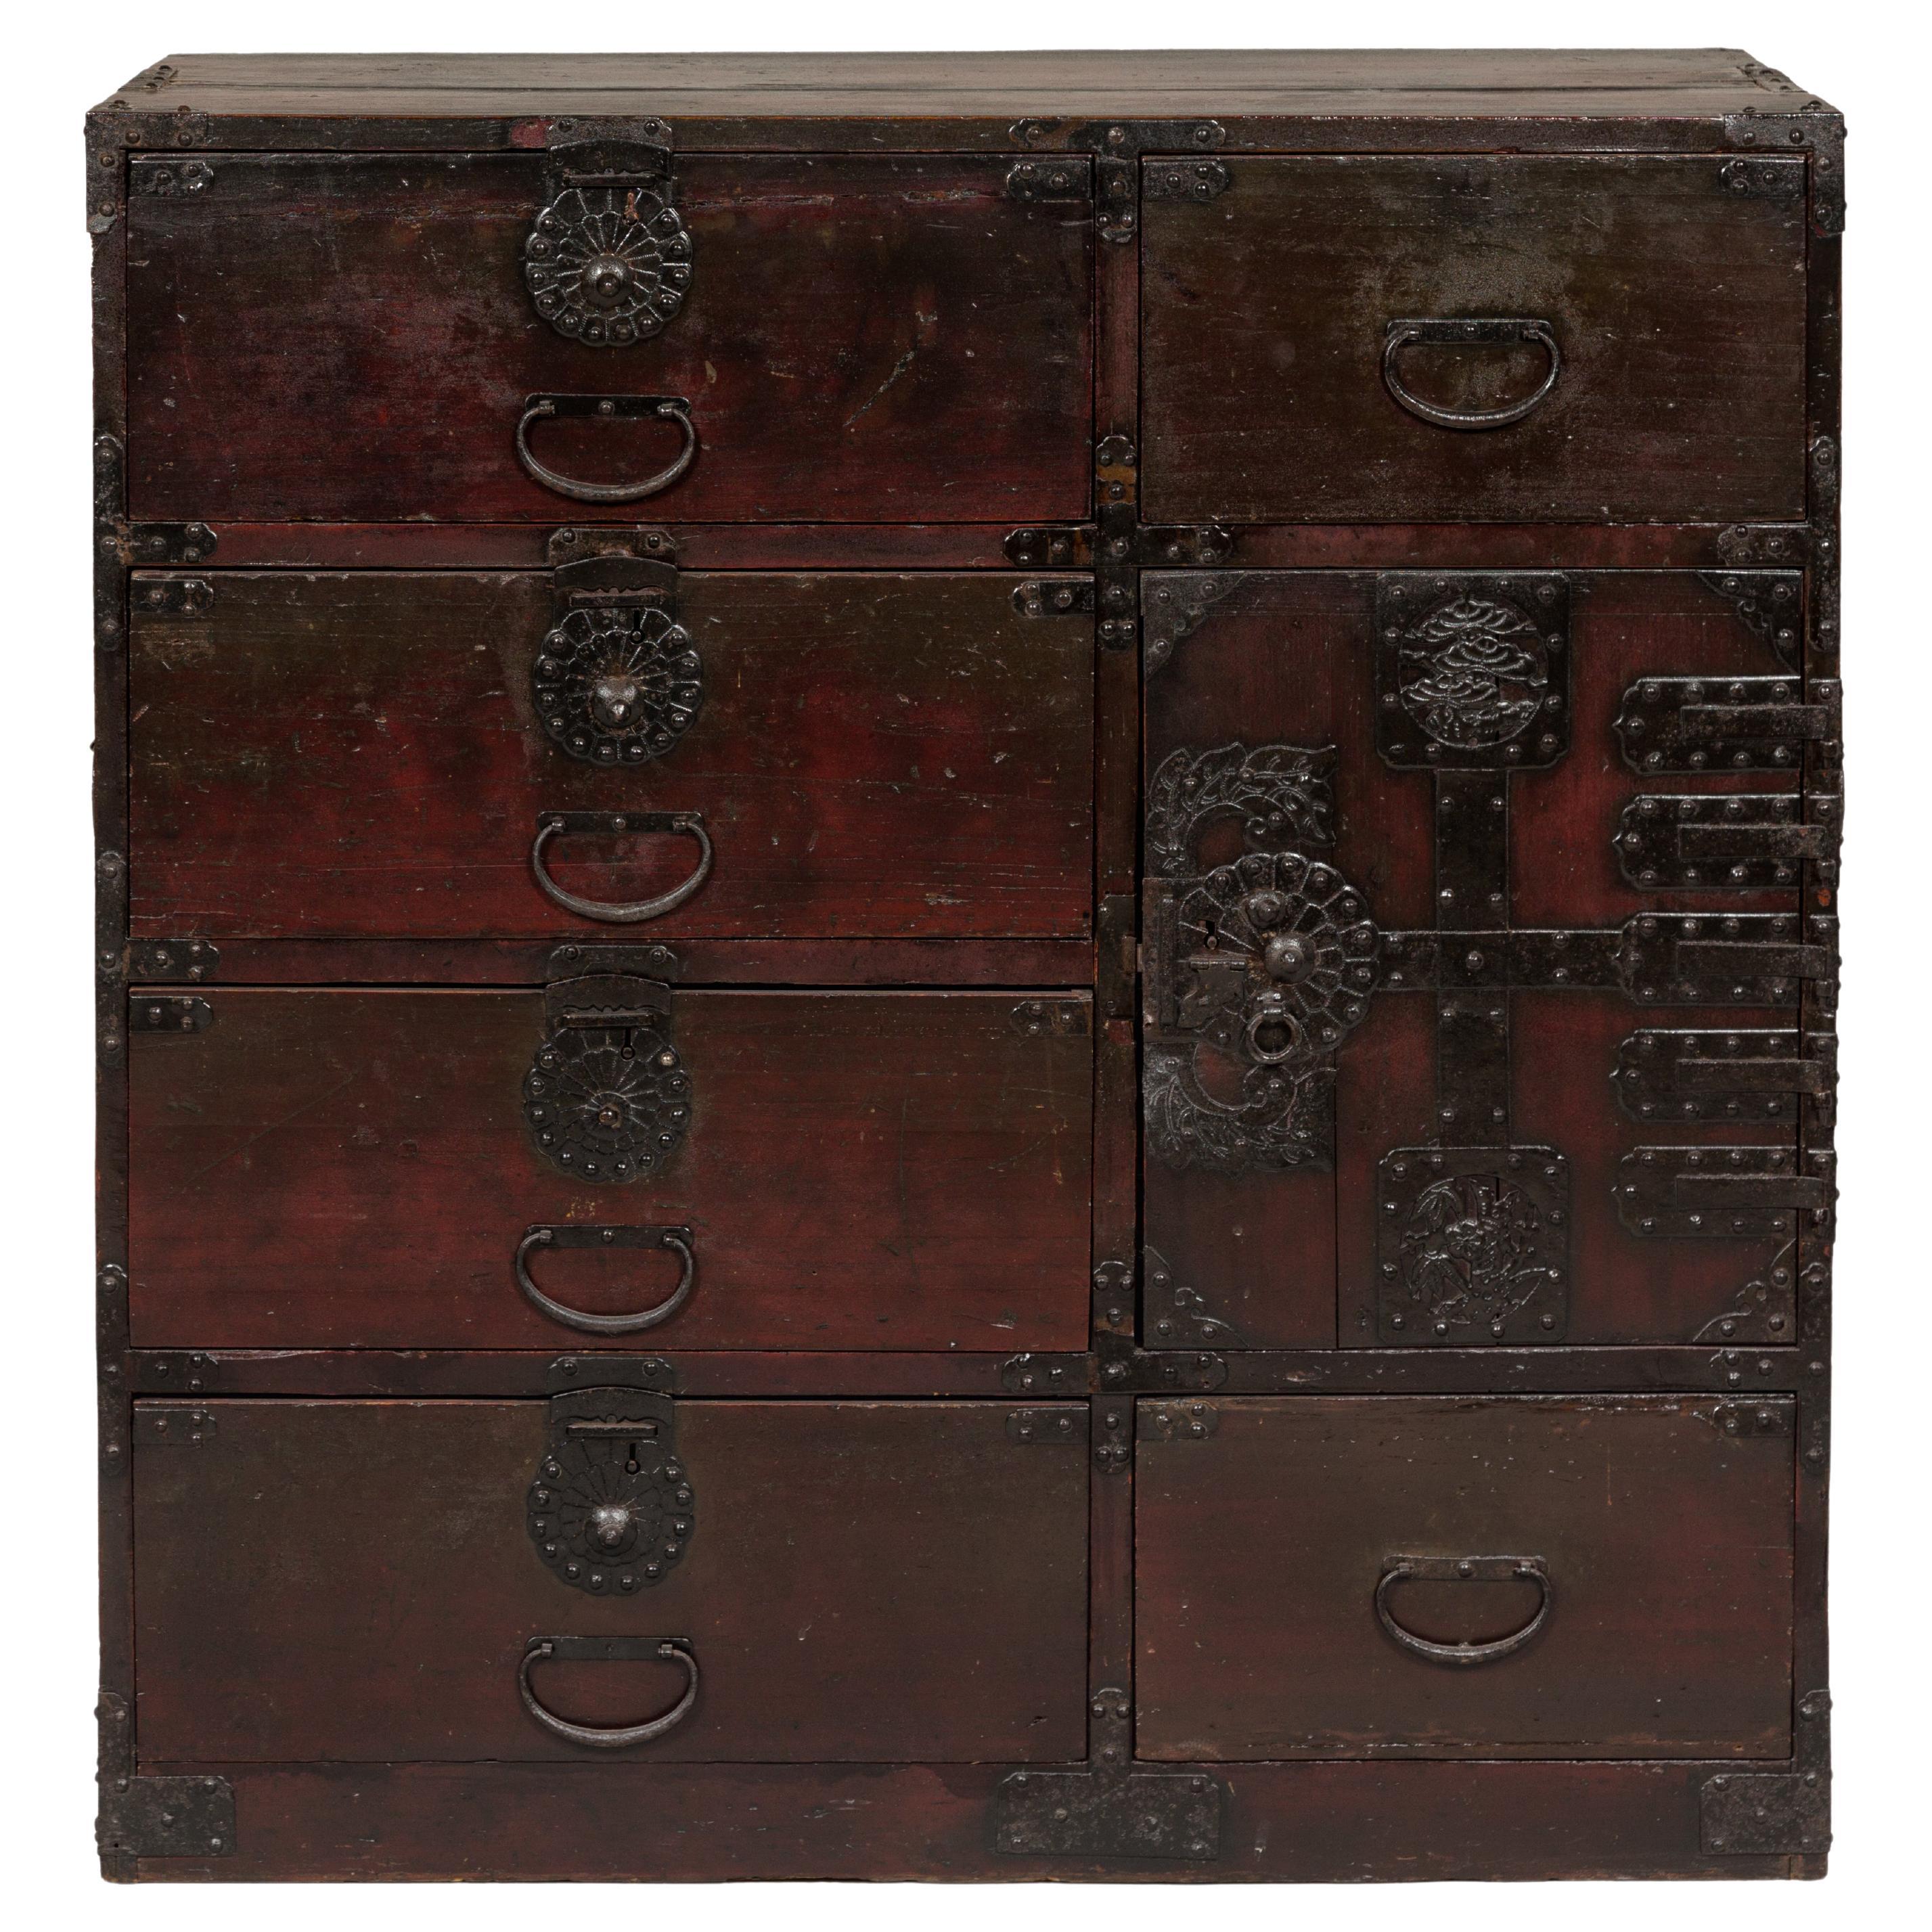 Japanese Meiji Period 19th Century Sendai Type Tansu Chest with Drawers and Safe For Sale